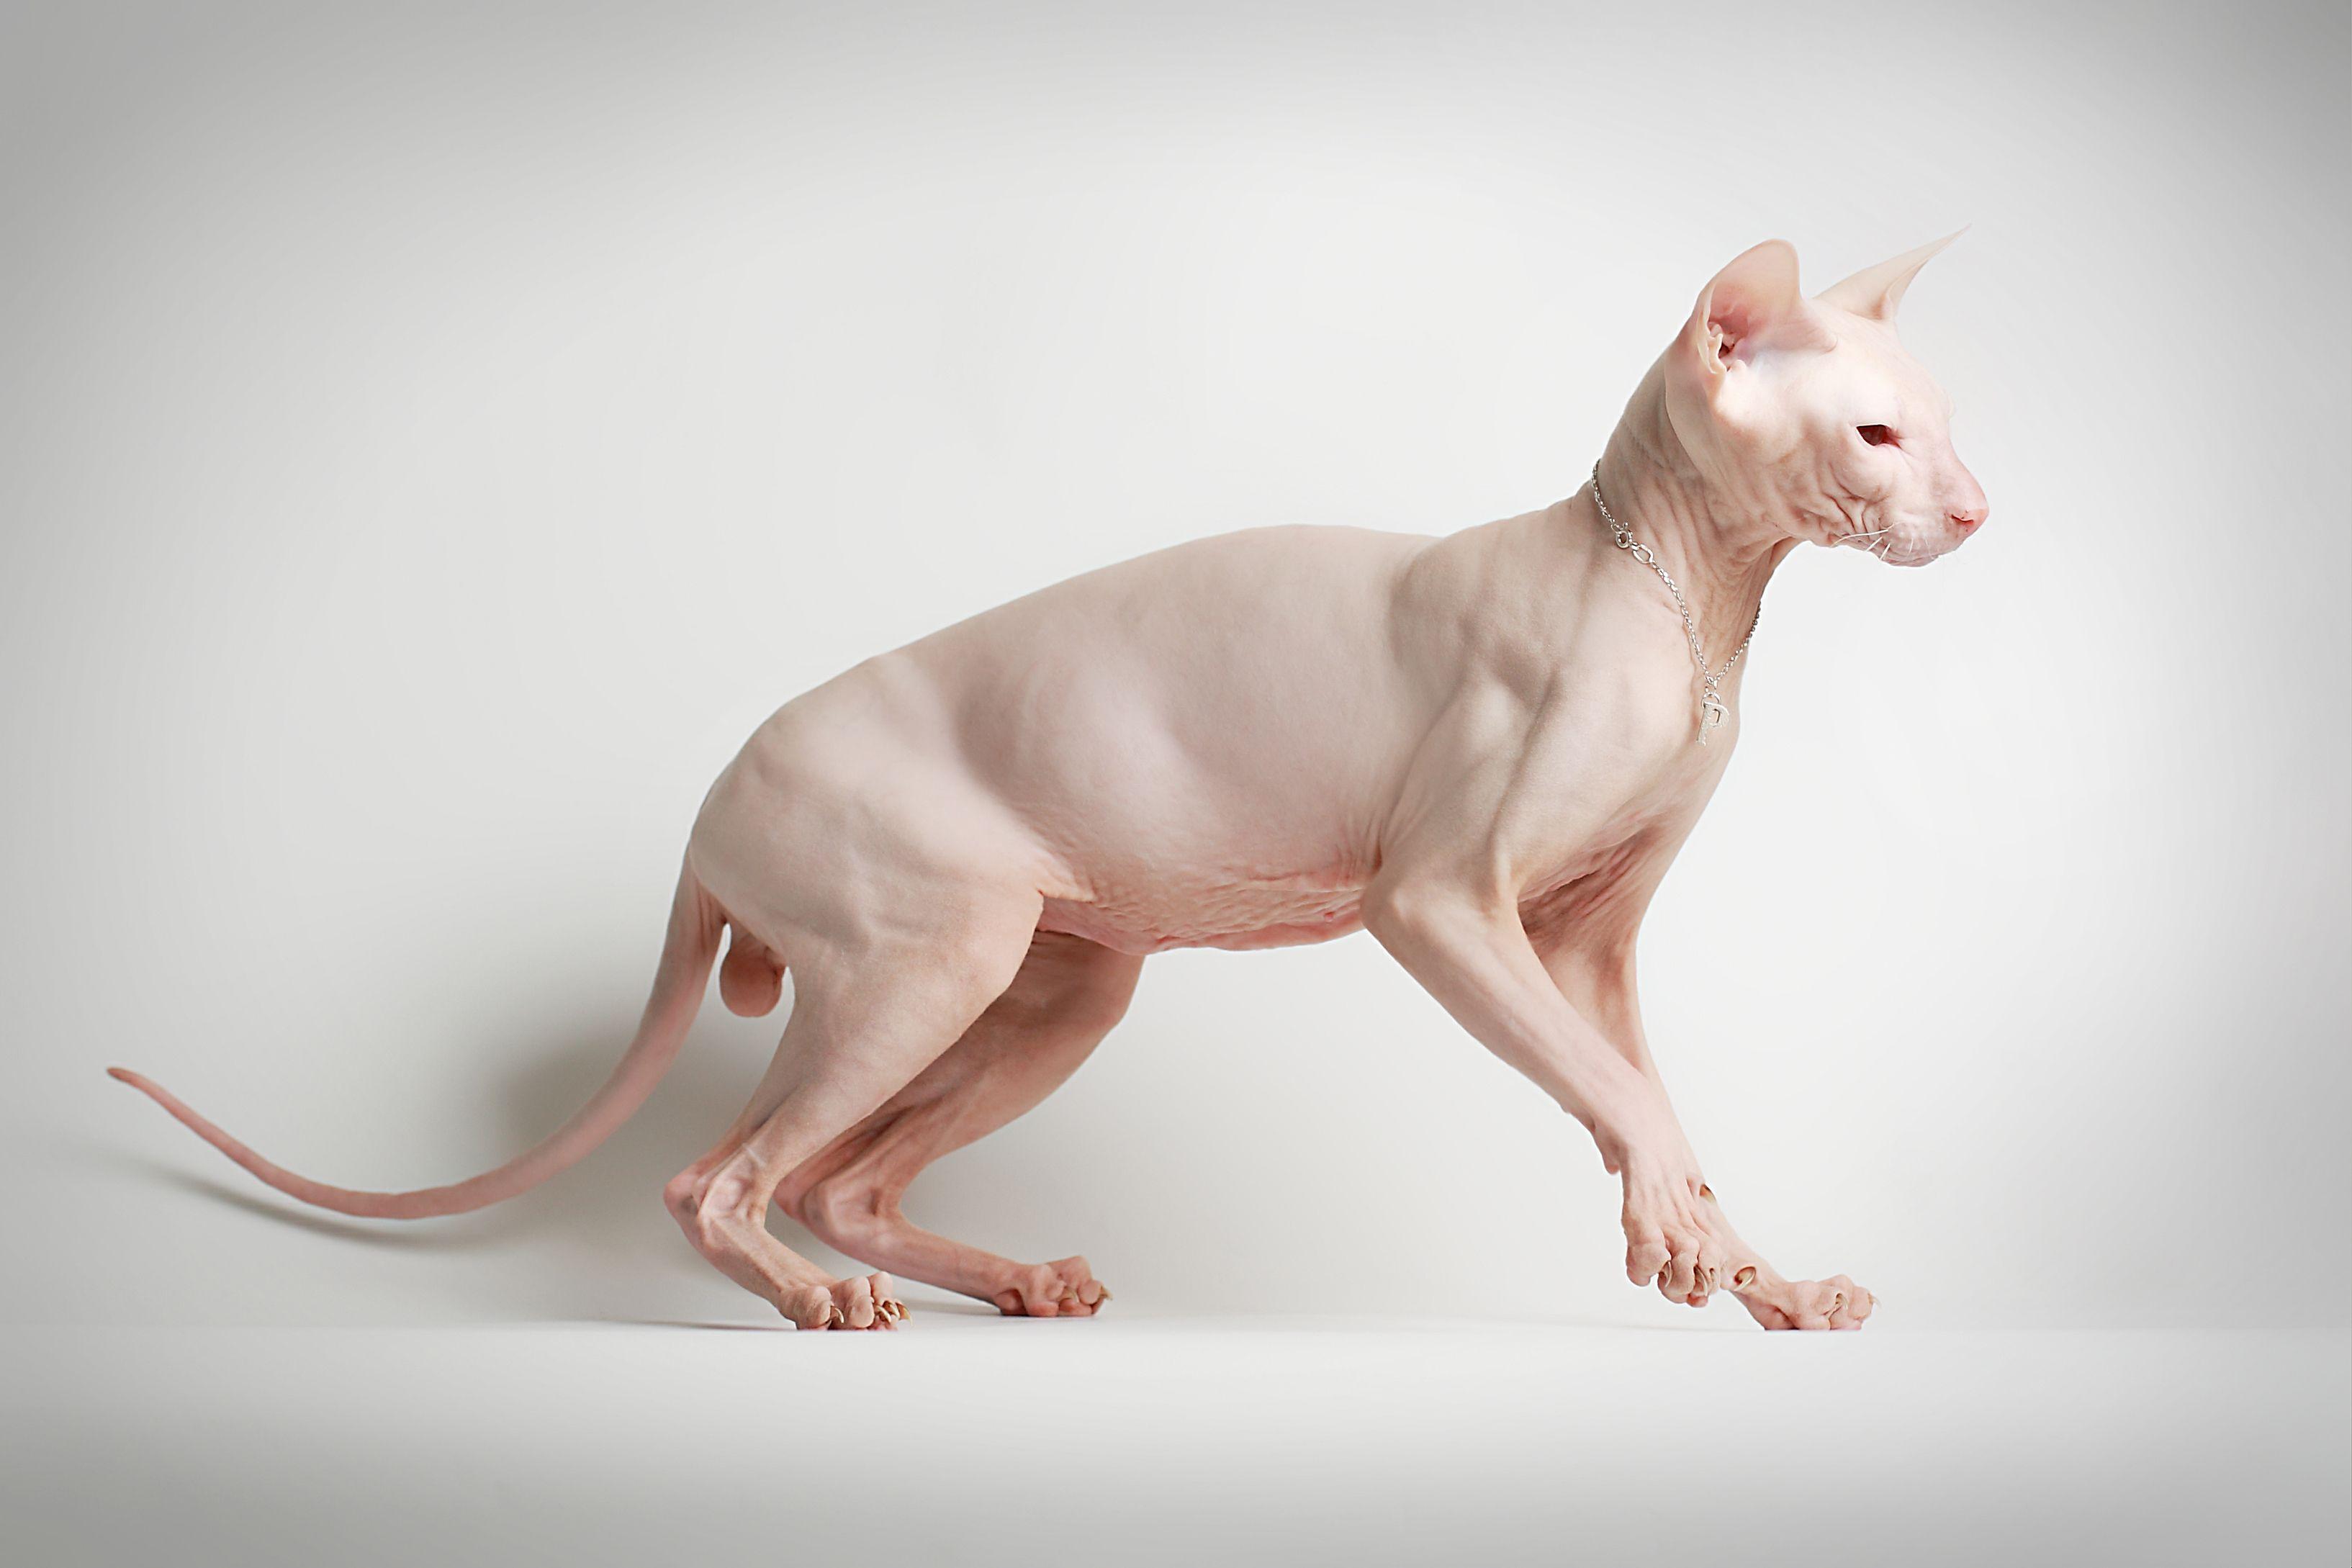 Sphynx cat posing on a white background wallpaper and image